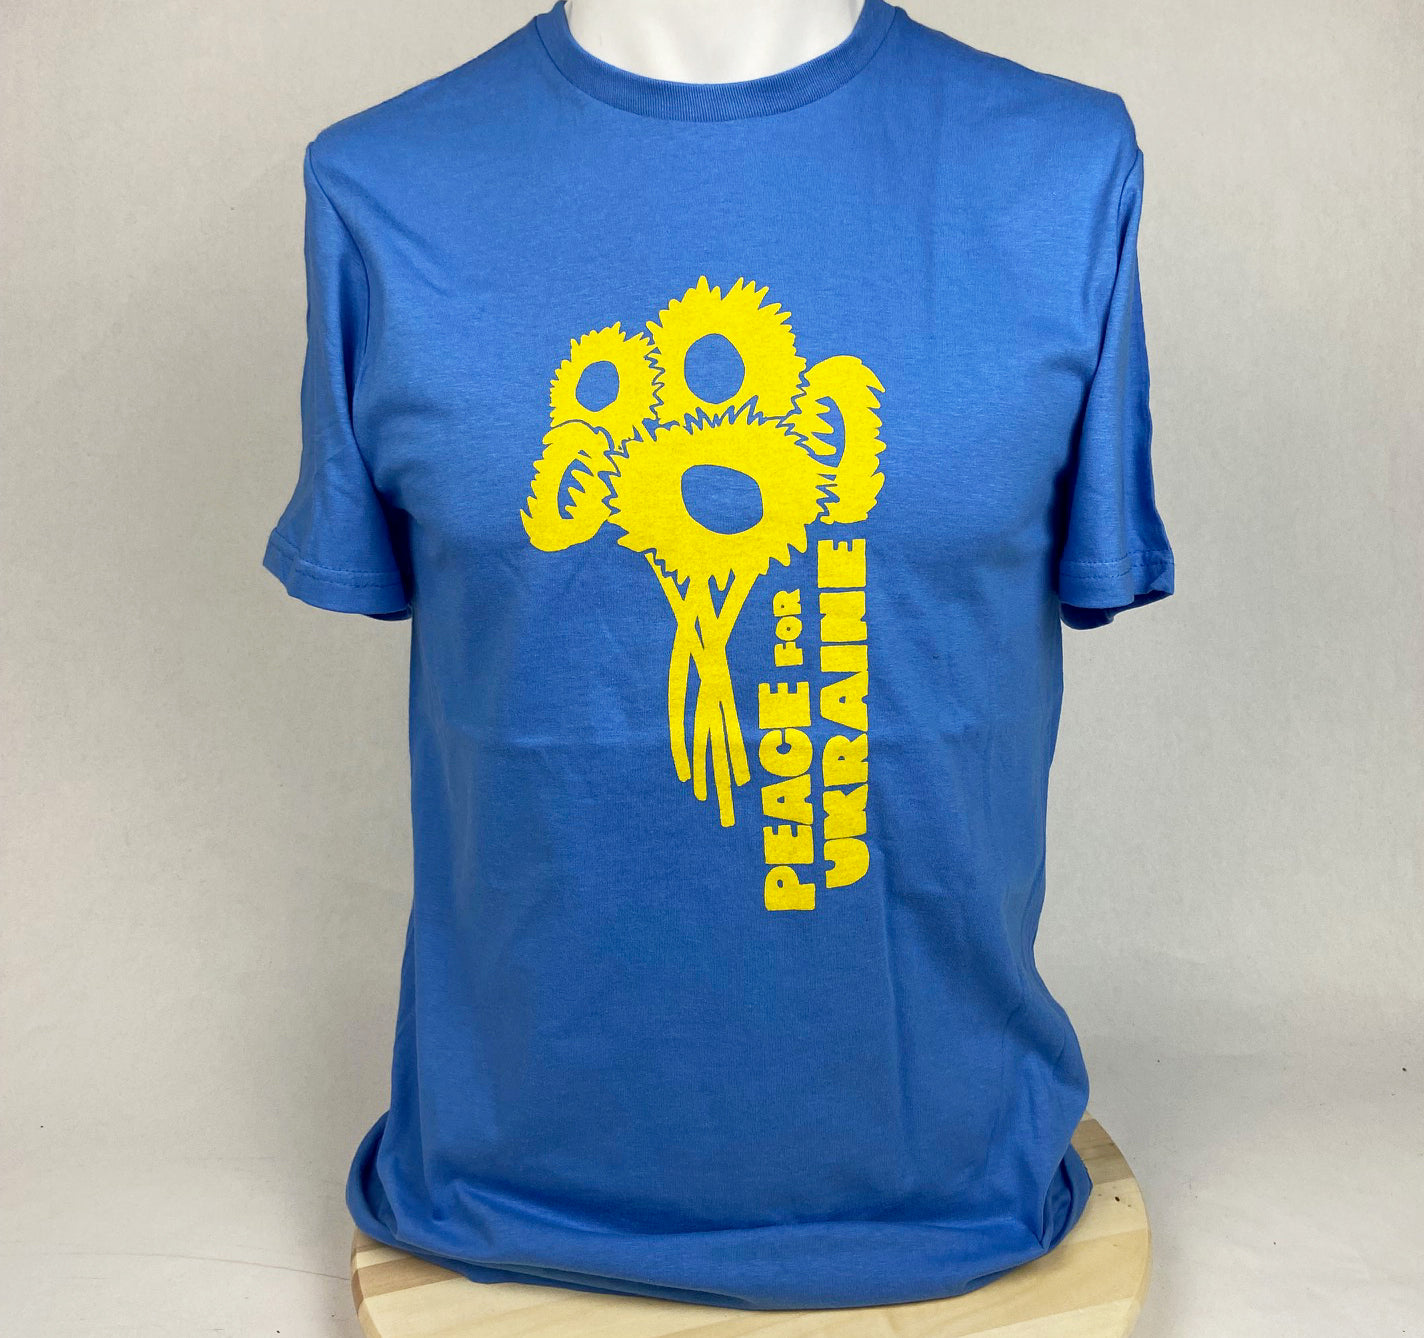 PEACE FOR UKRAINE Unisex Tee in Support of the Ukraine Crisis - LIMITED EDITION*